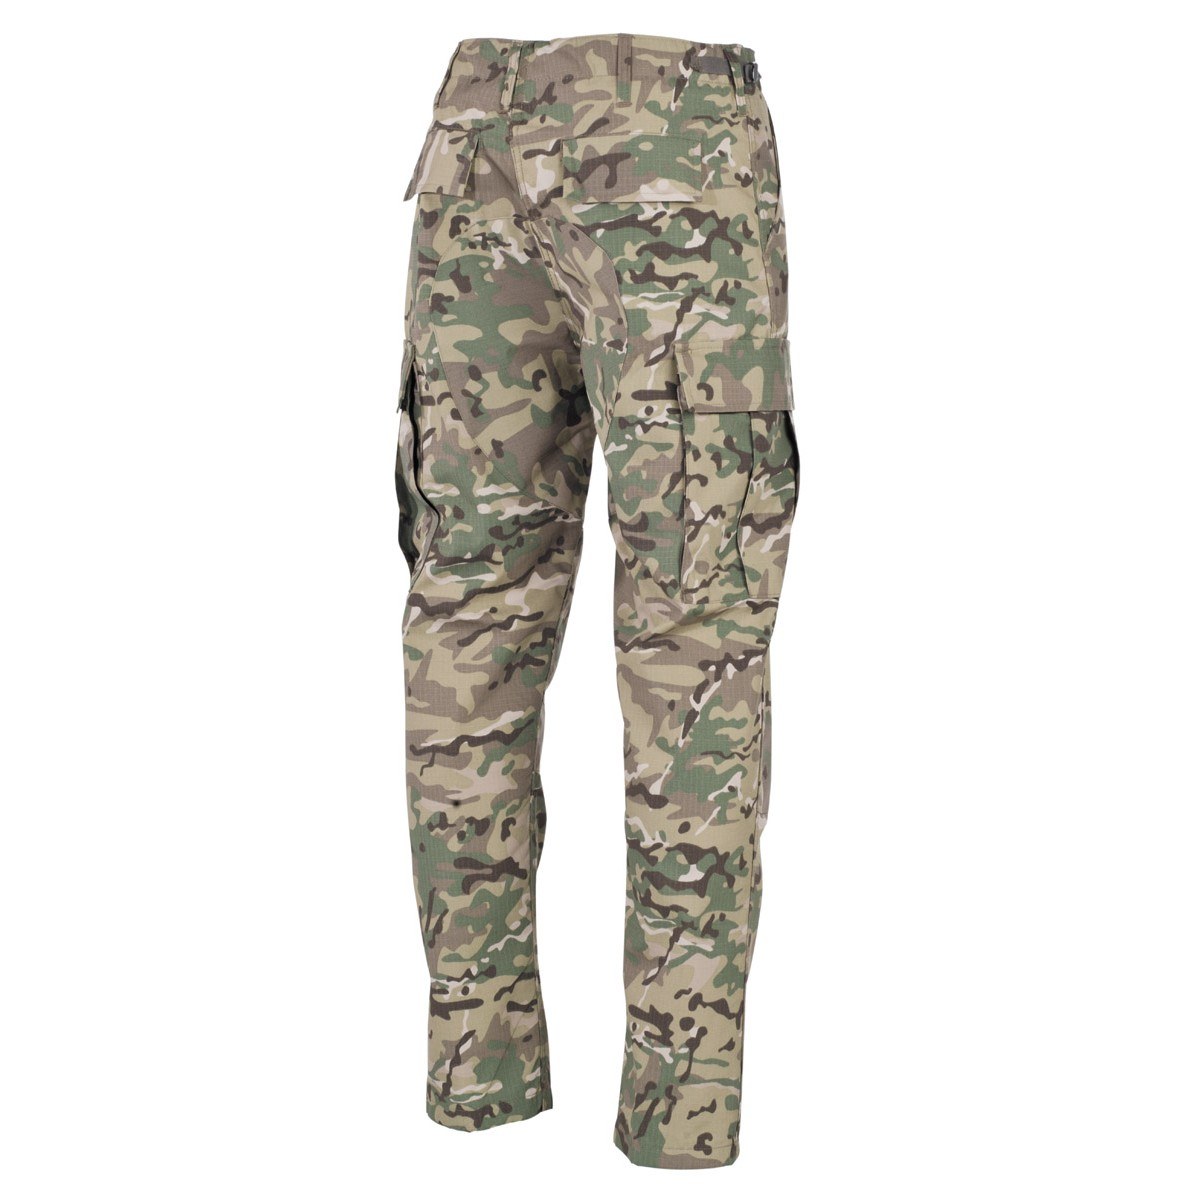 MFH Ripstop BDU Combat Trousers Military Tactical Airsoft Security Work ...